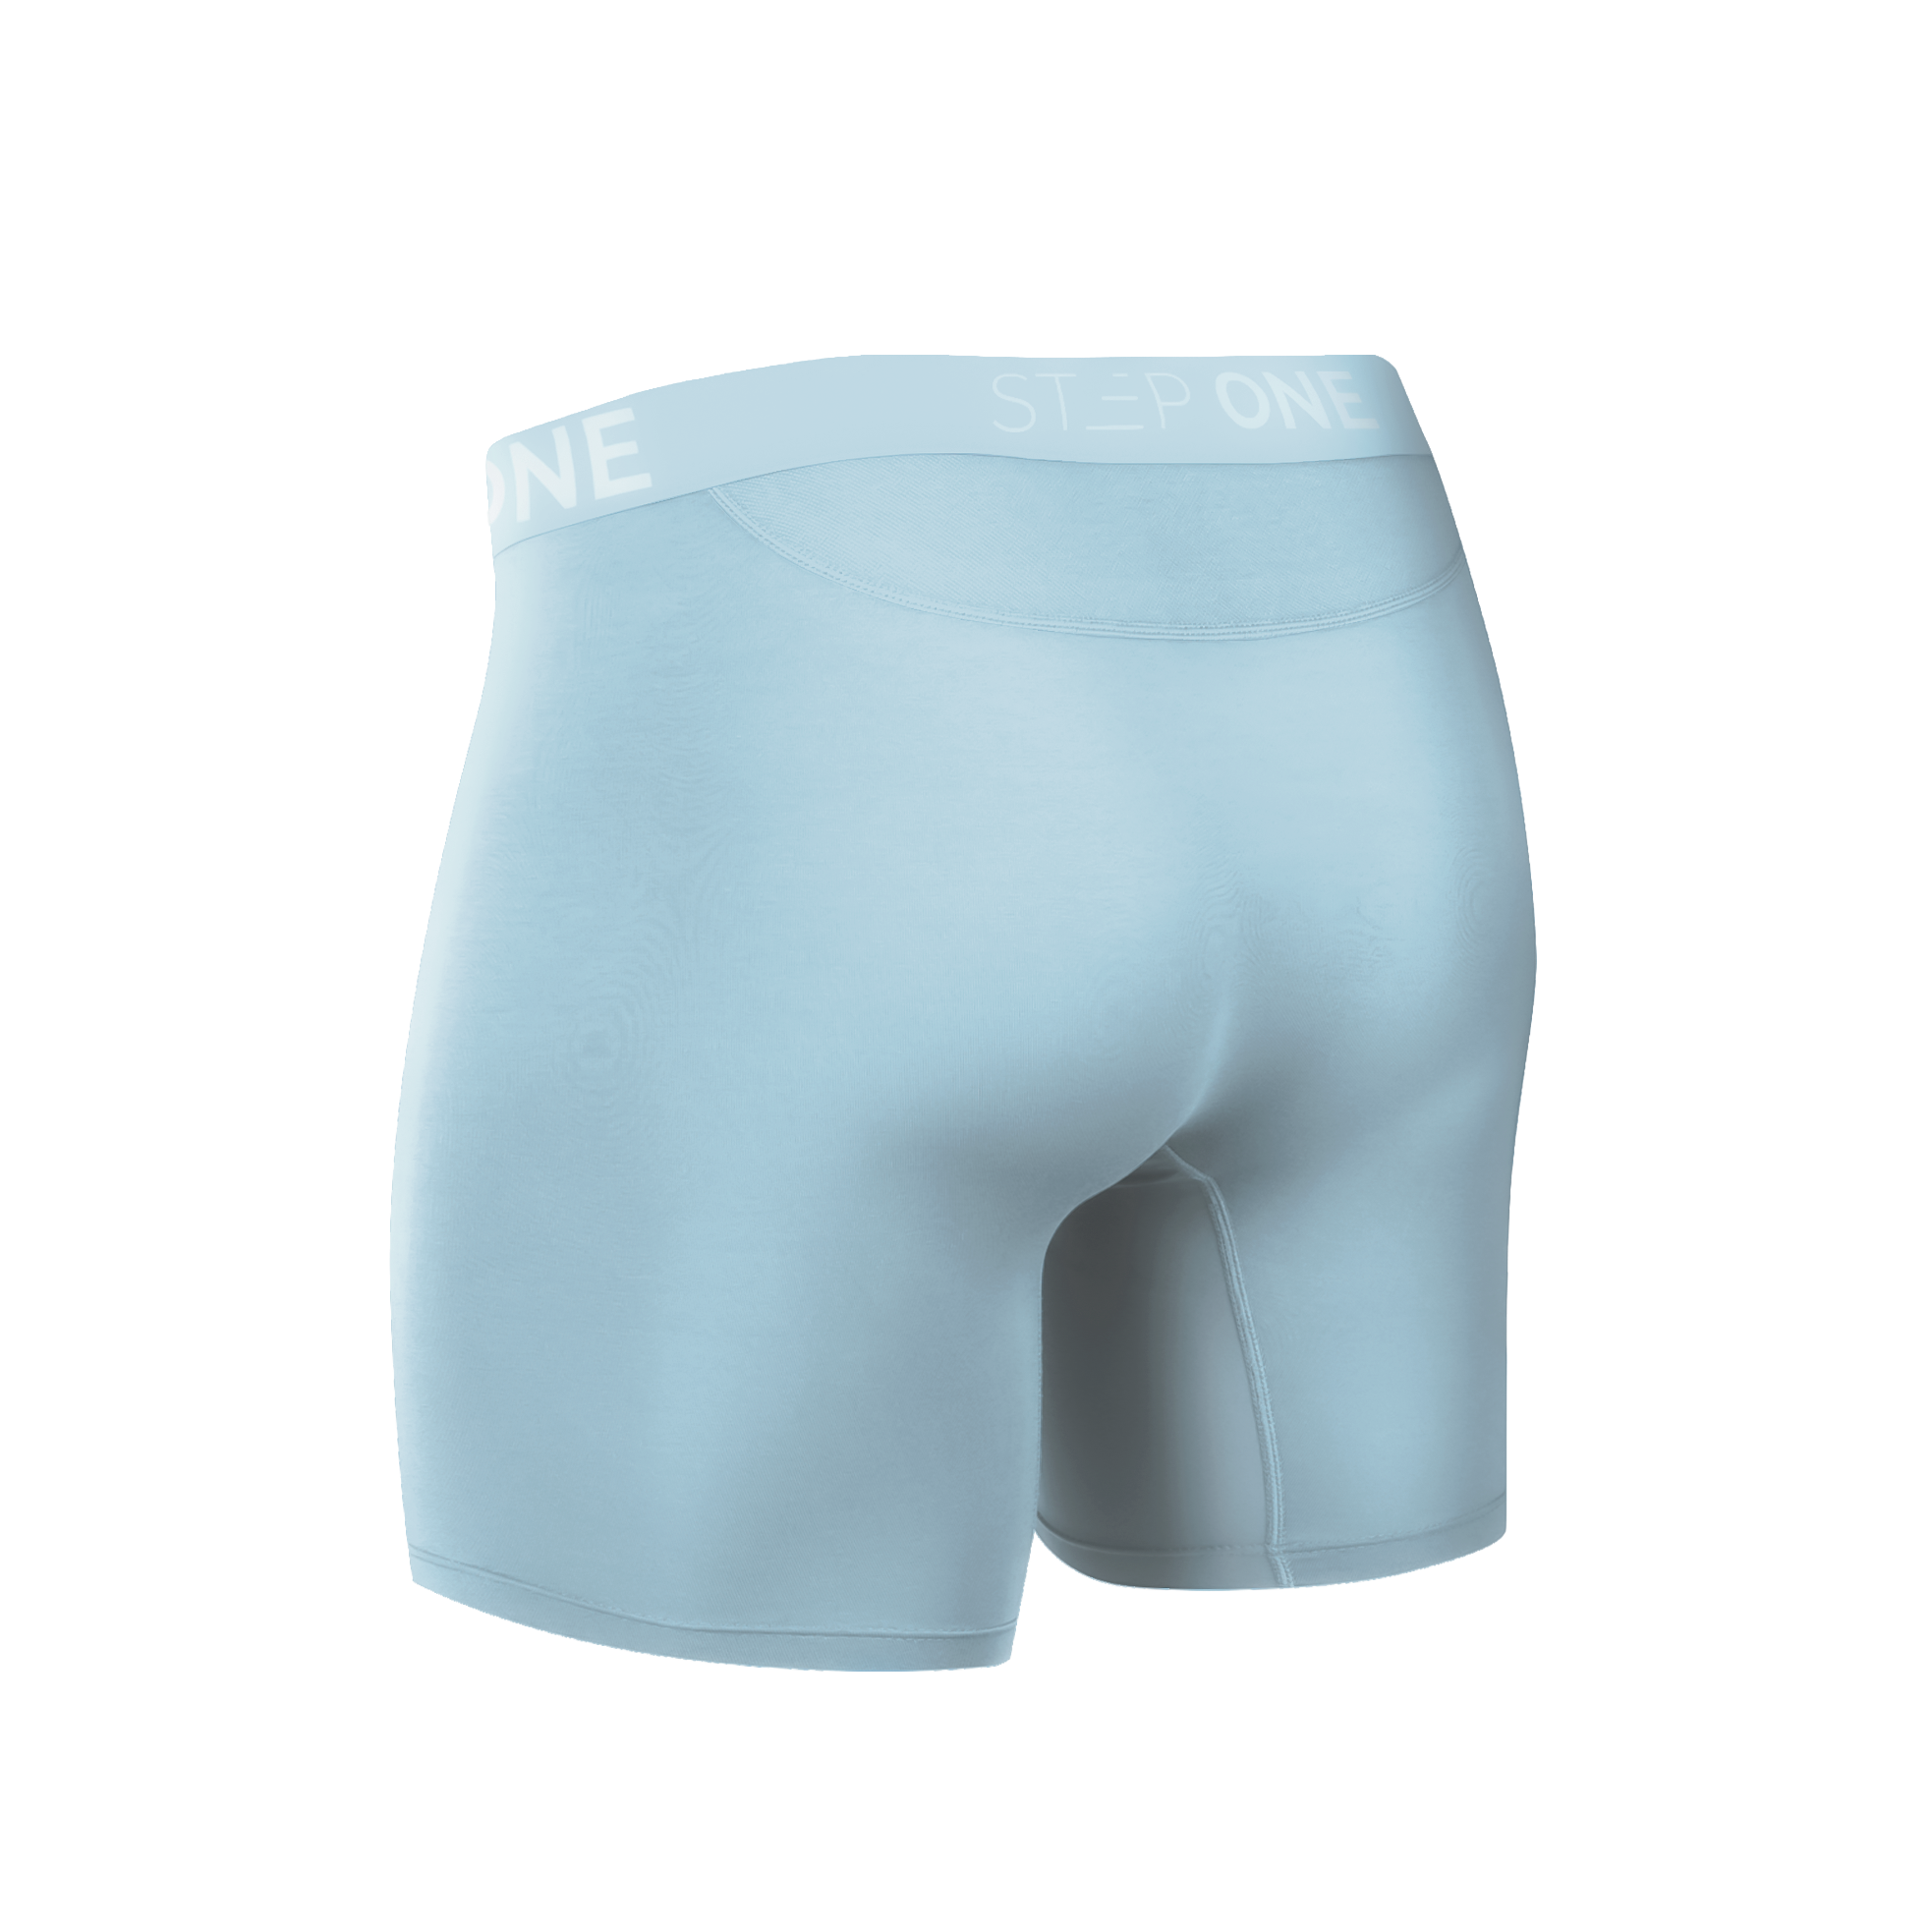 Boxer Brief - Ice Cubes - View 2